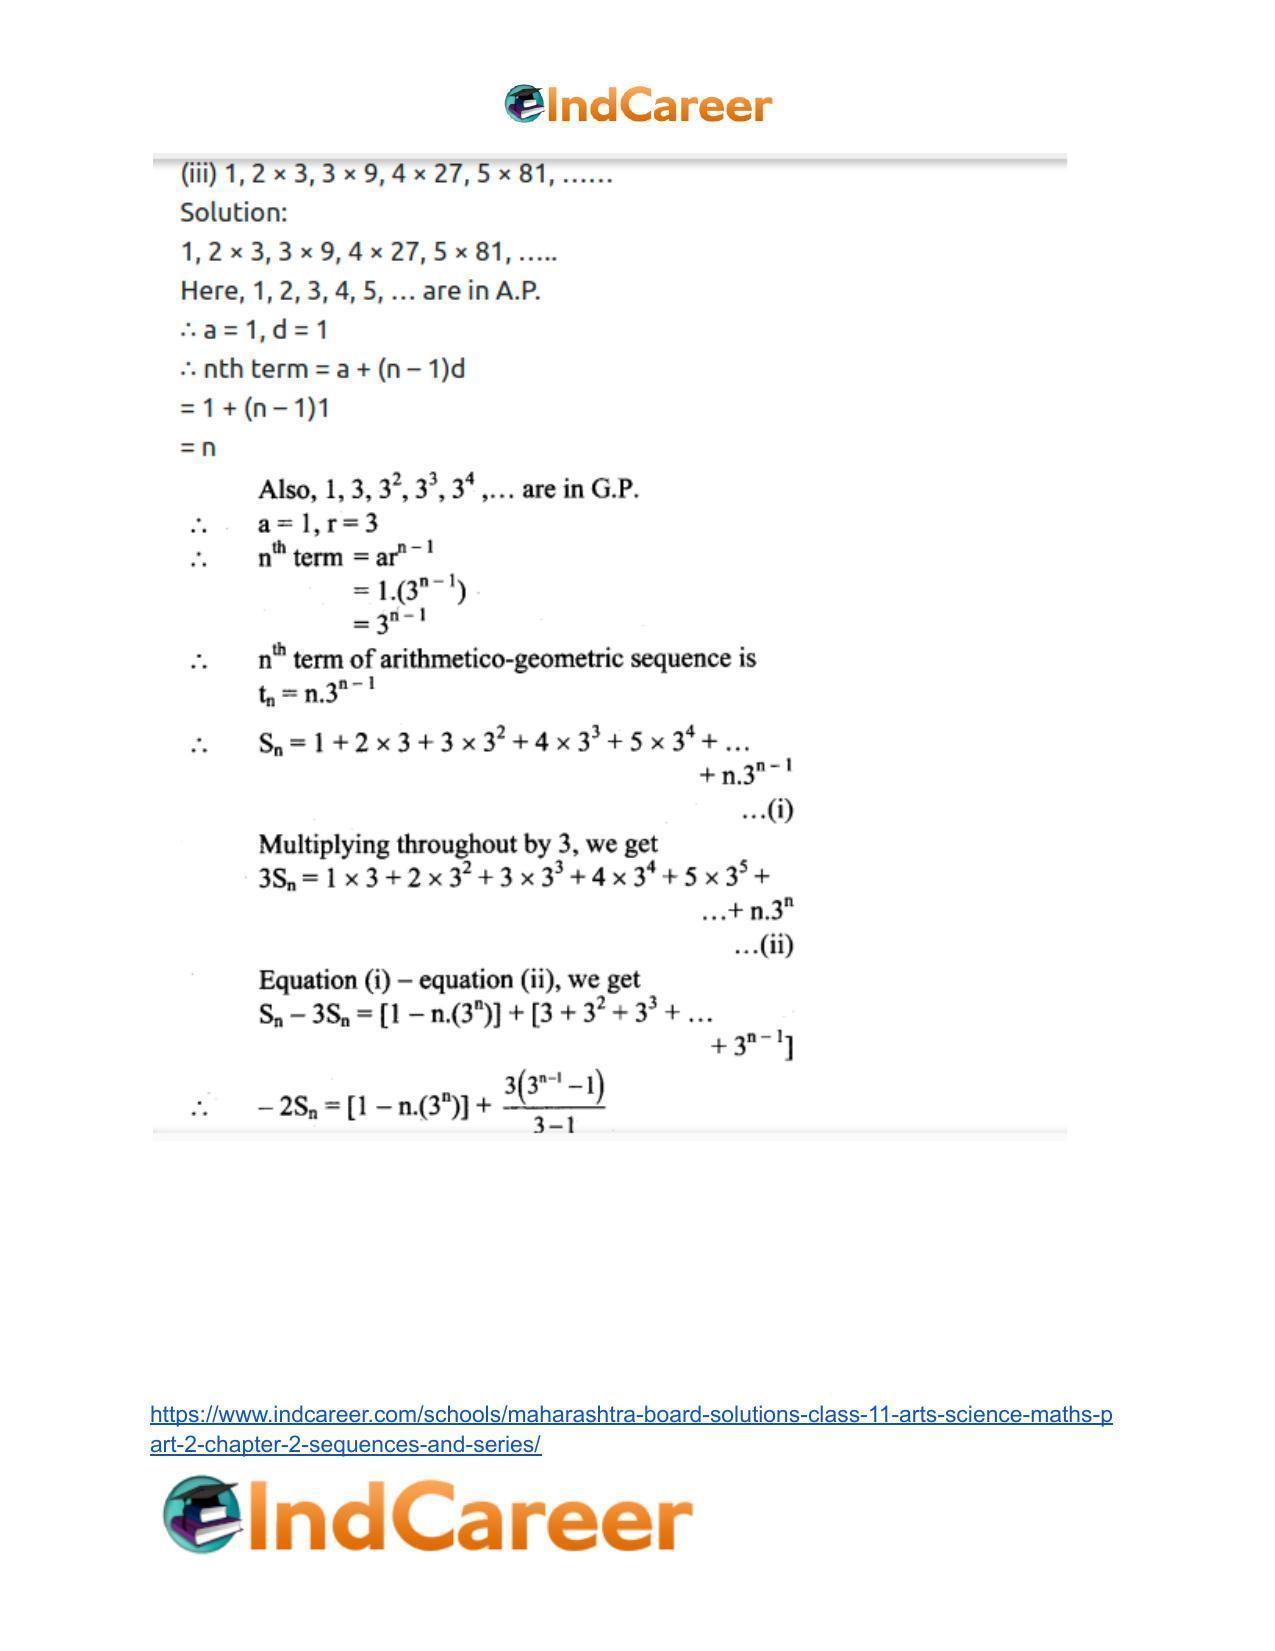 Maharashtra Board Solutions Class 11-Arts & Science Maths (Part 2): Chapter 2- Sequences and Series - Page 62